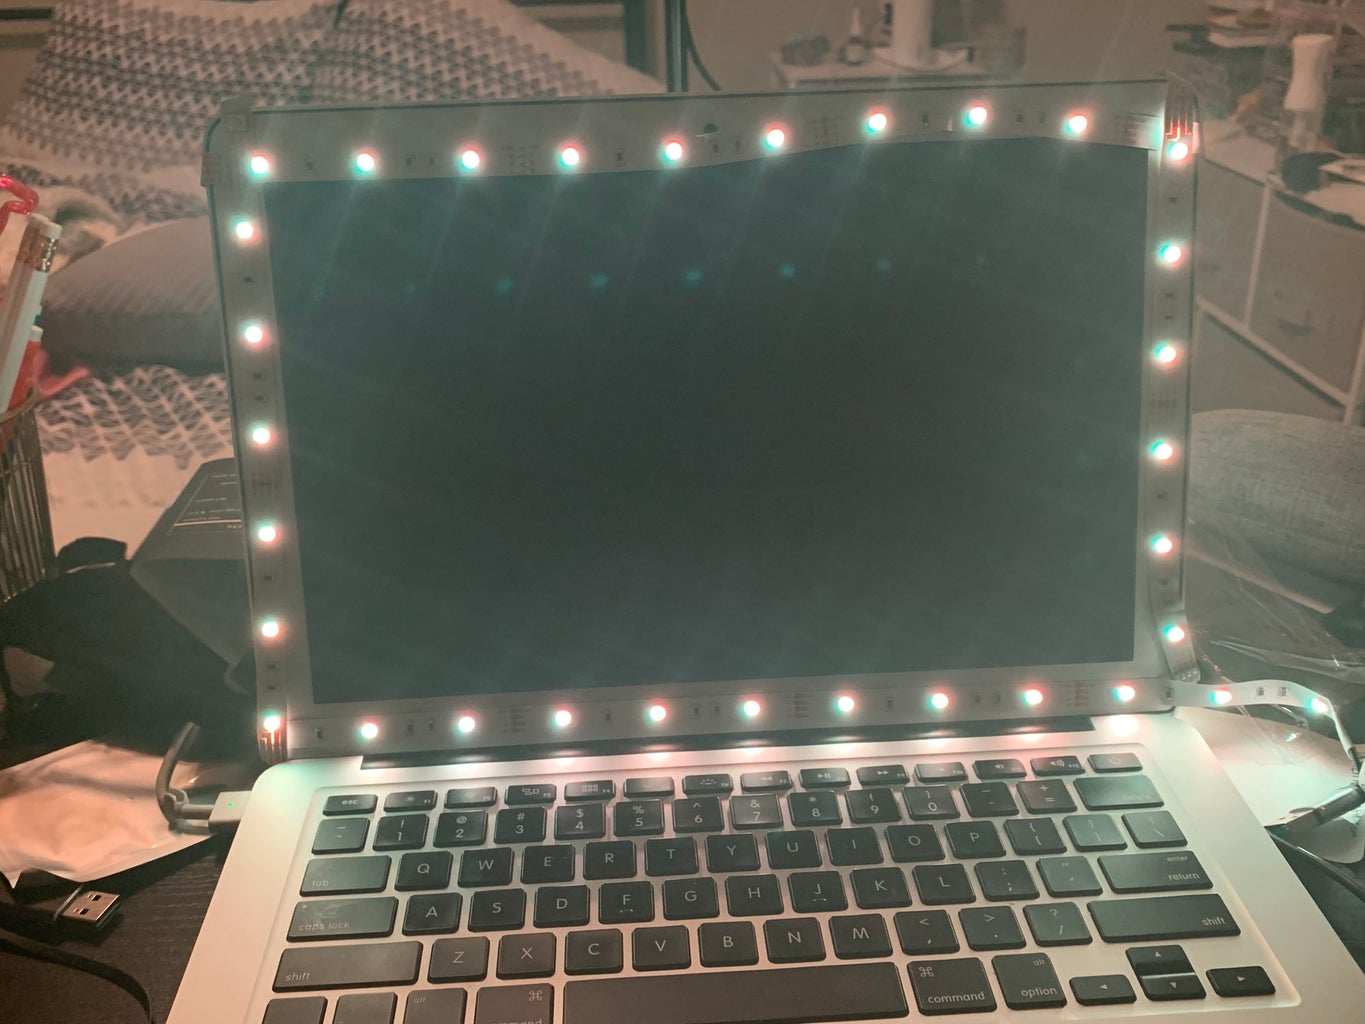 A laptop with LED lights around the screen